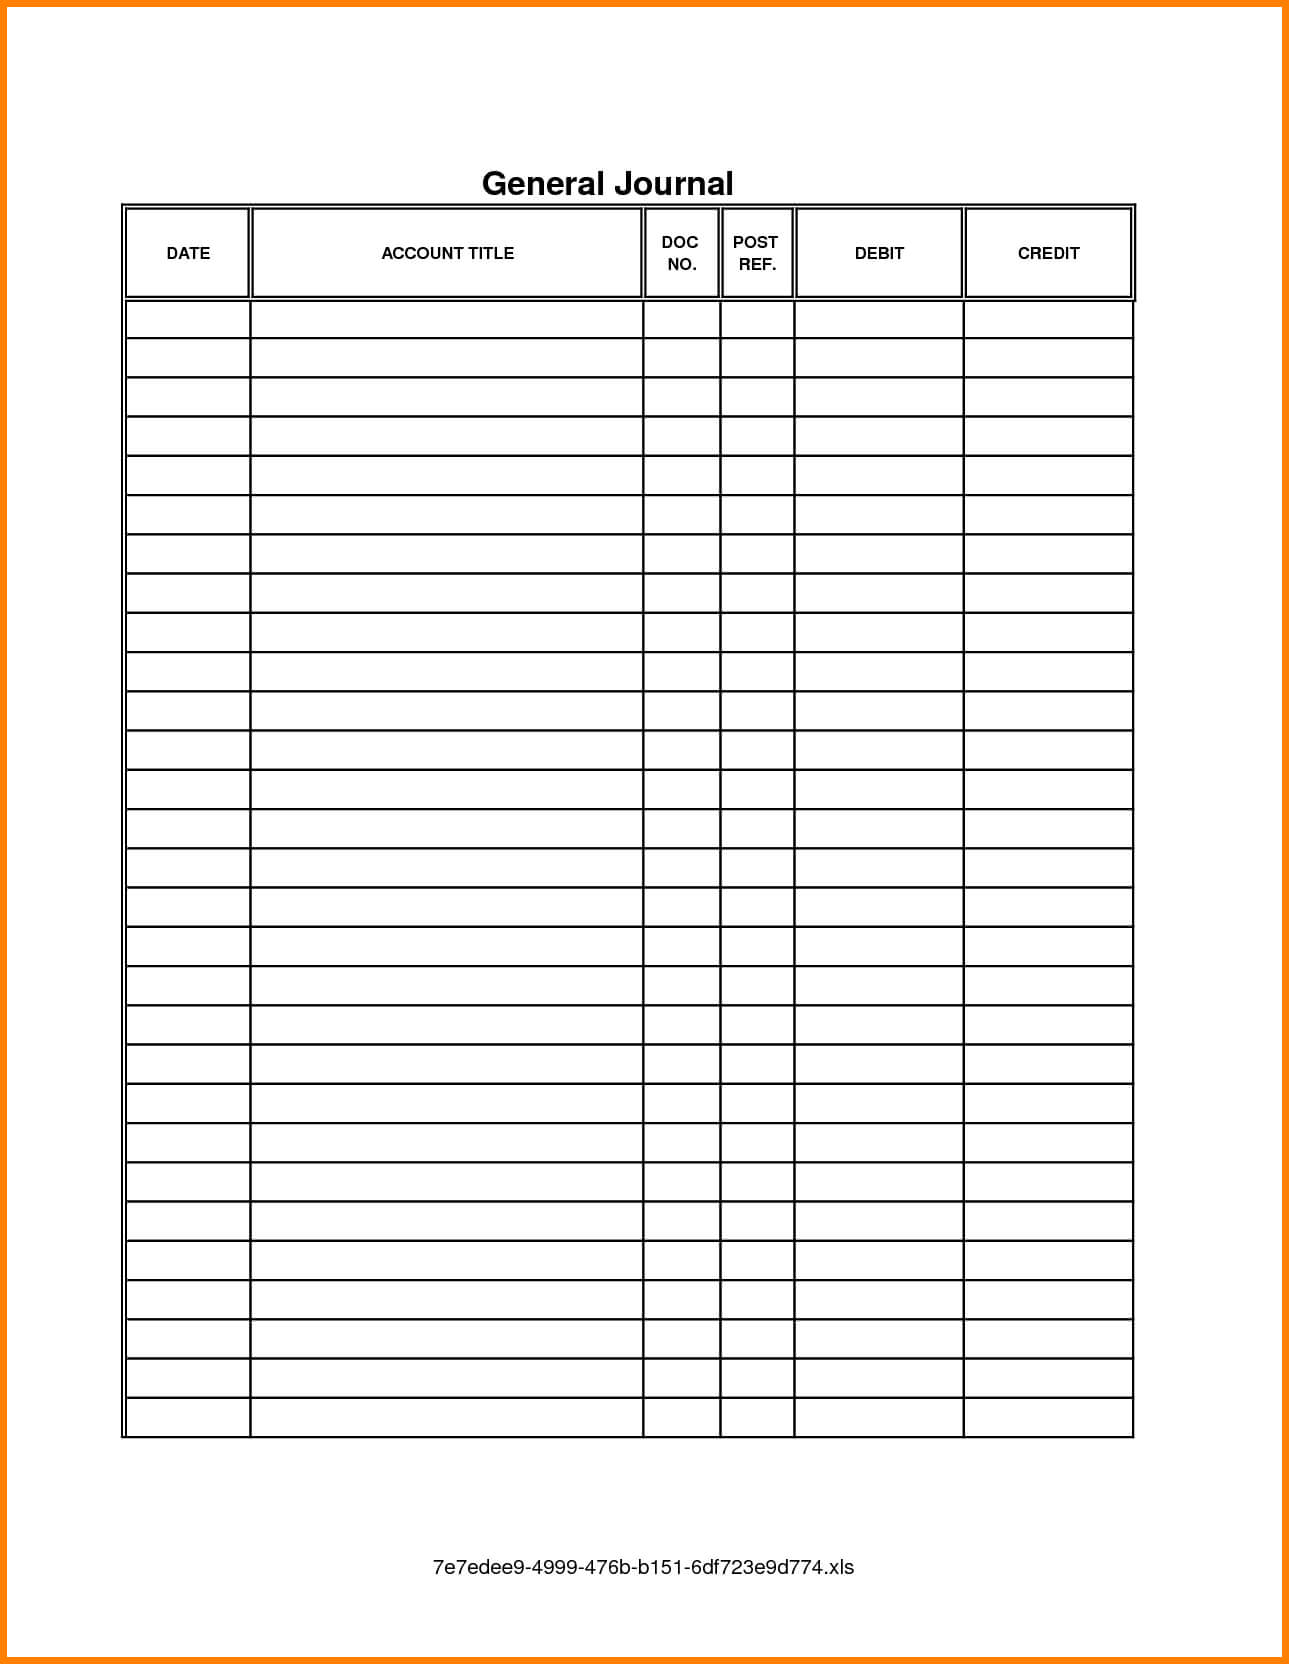 012 Template Ideas General Journal Ledger Accounting For Double Entry Journal Template For Word